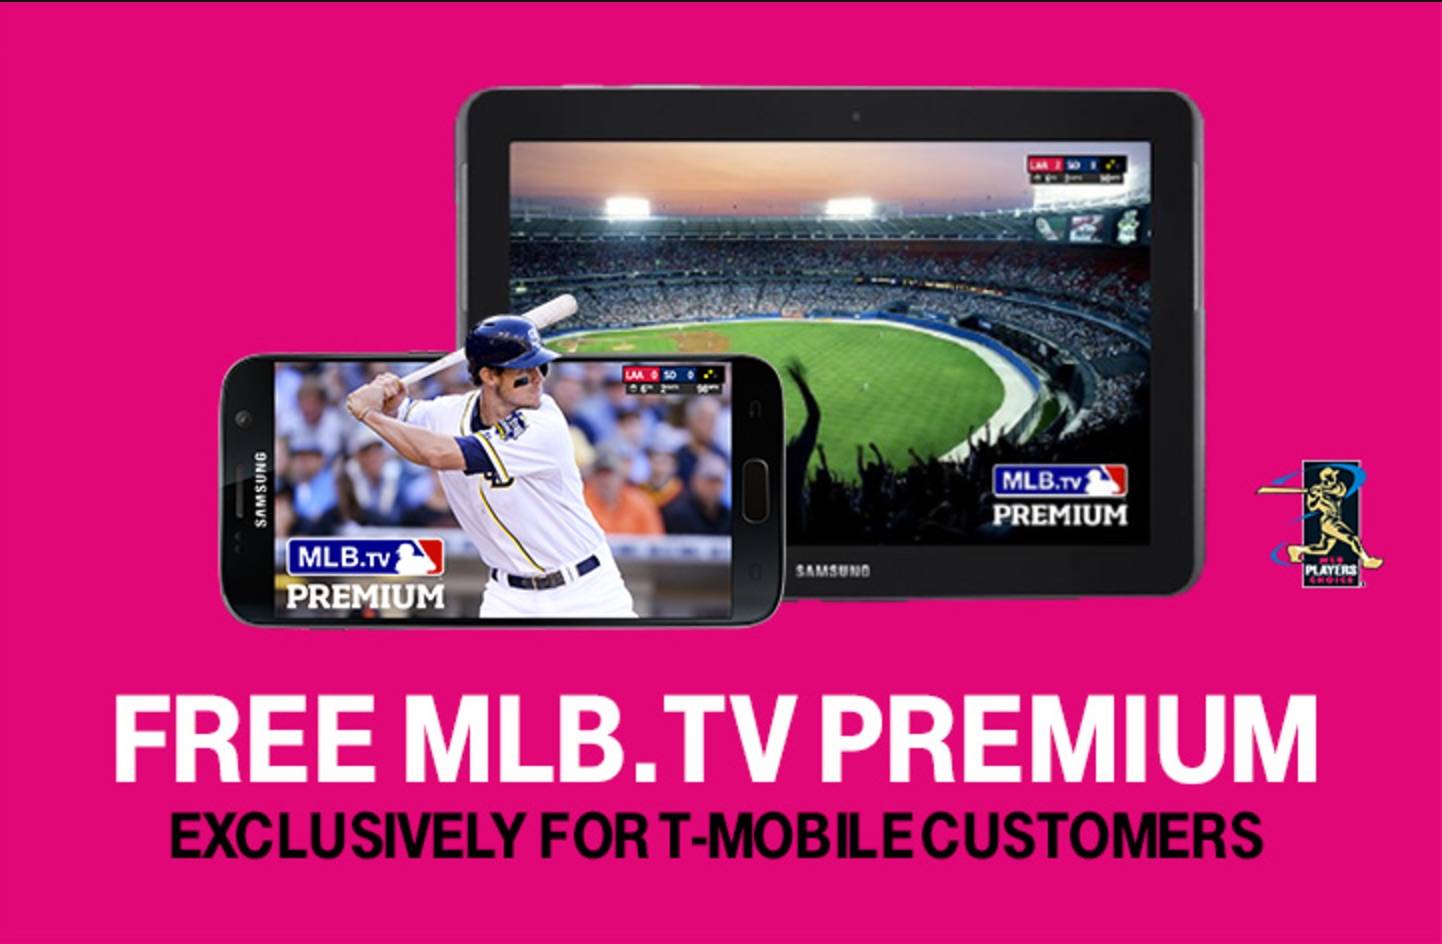 TMobile  Get a FREE subscription to MLB Premium when you download the  TMobileTuesdays app   Facebook